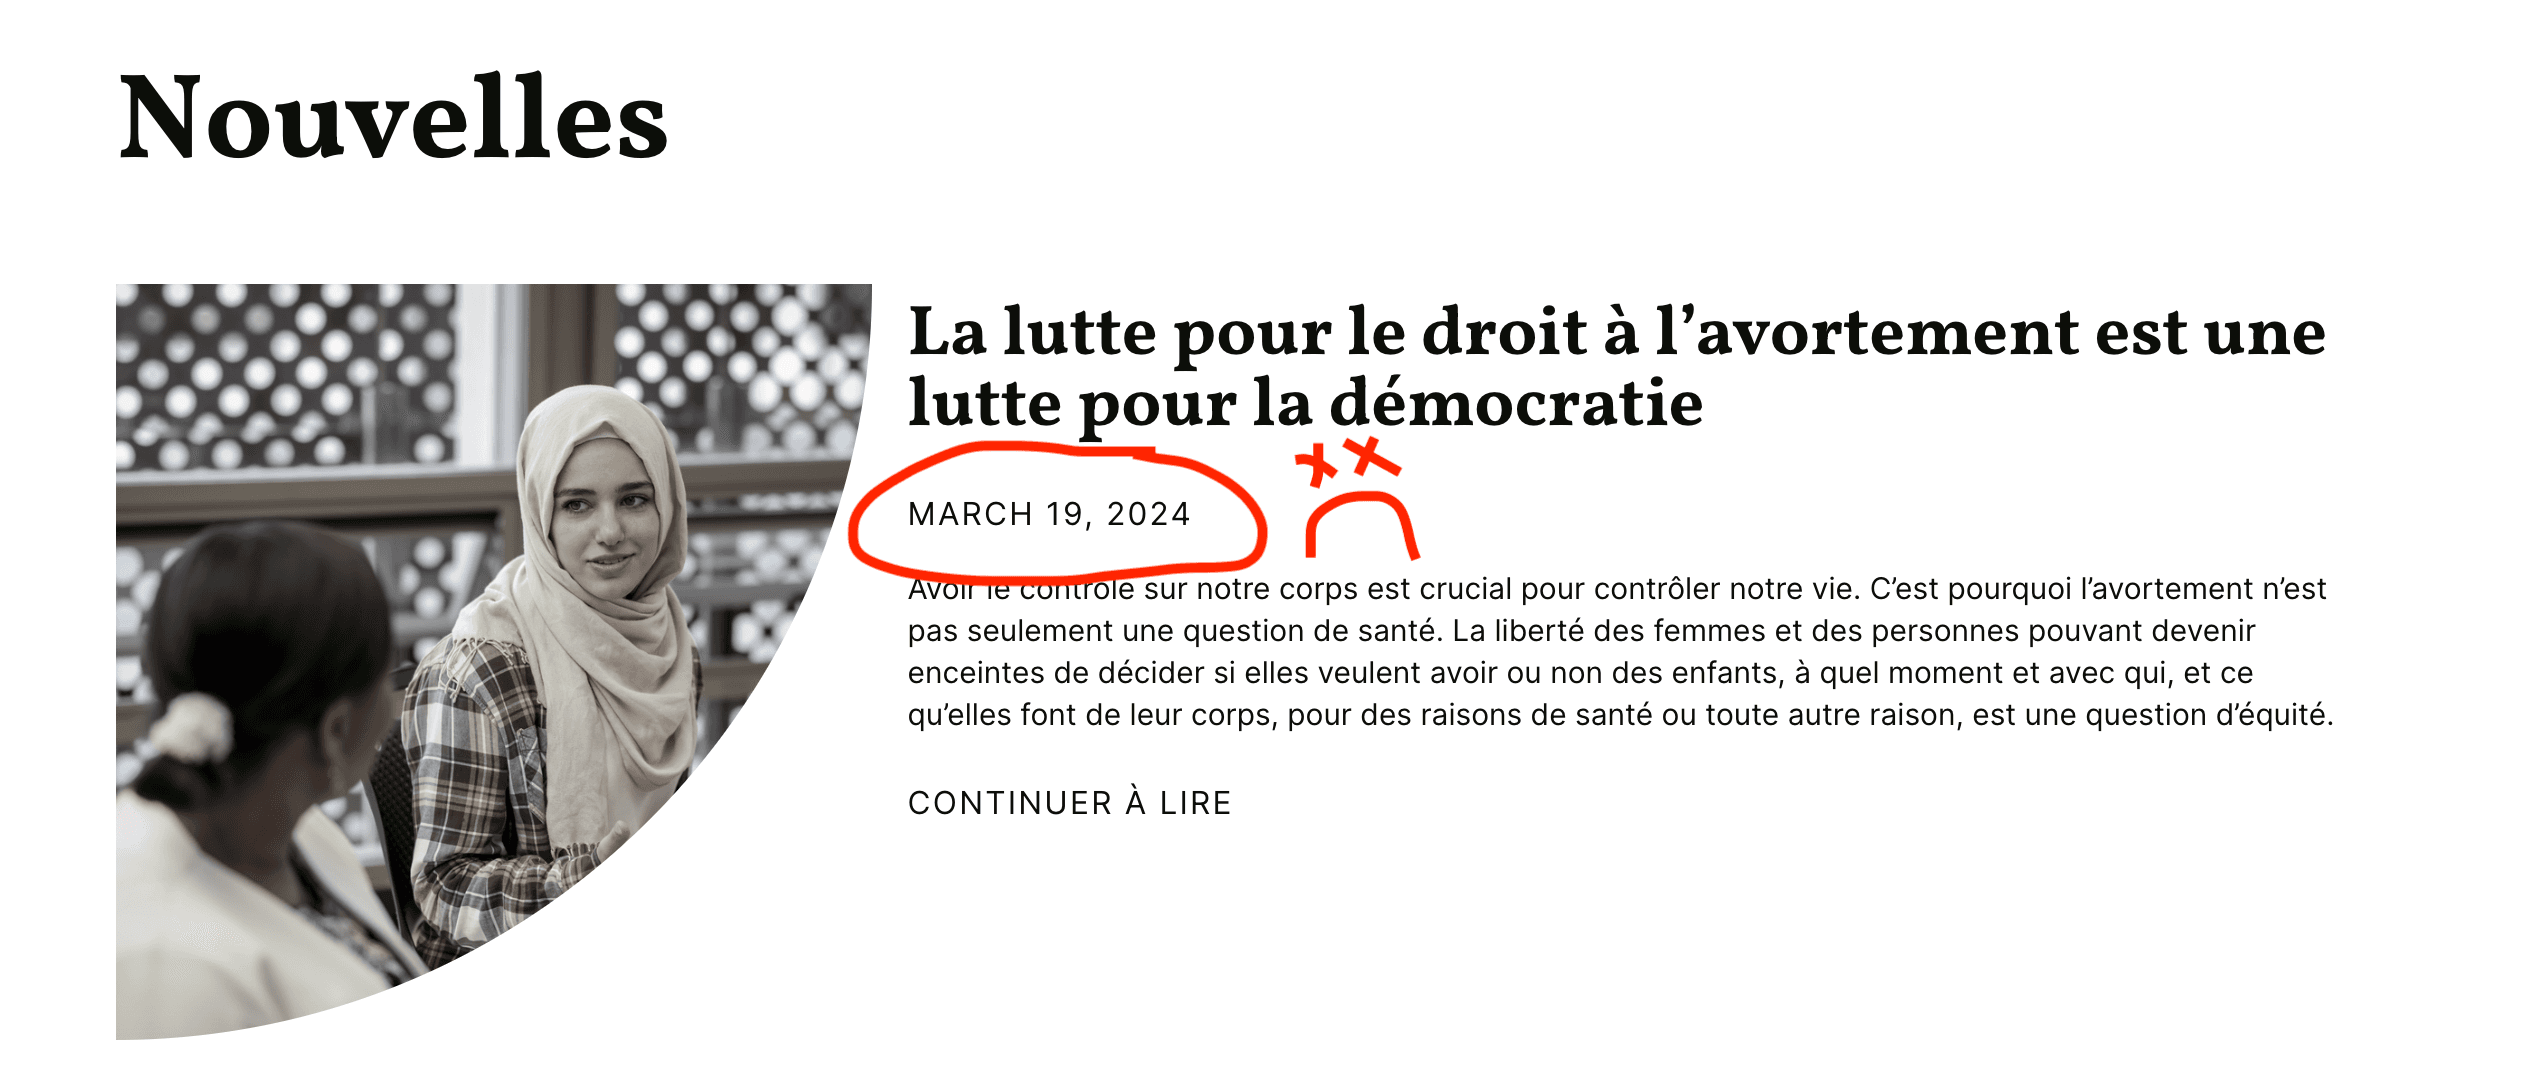 French article with an English date